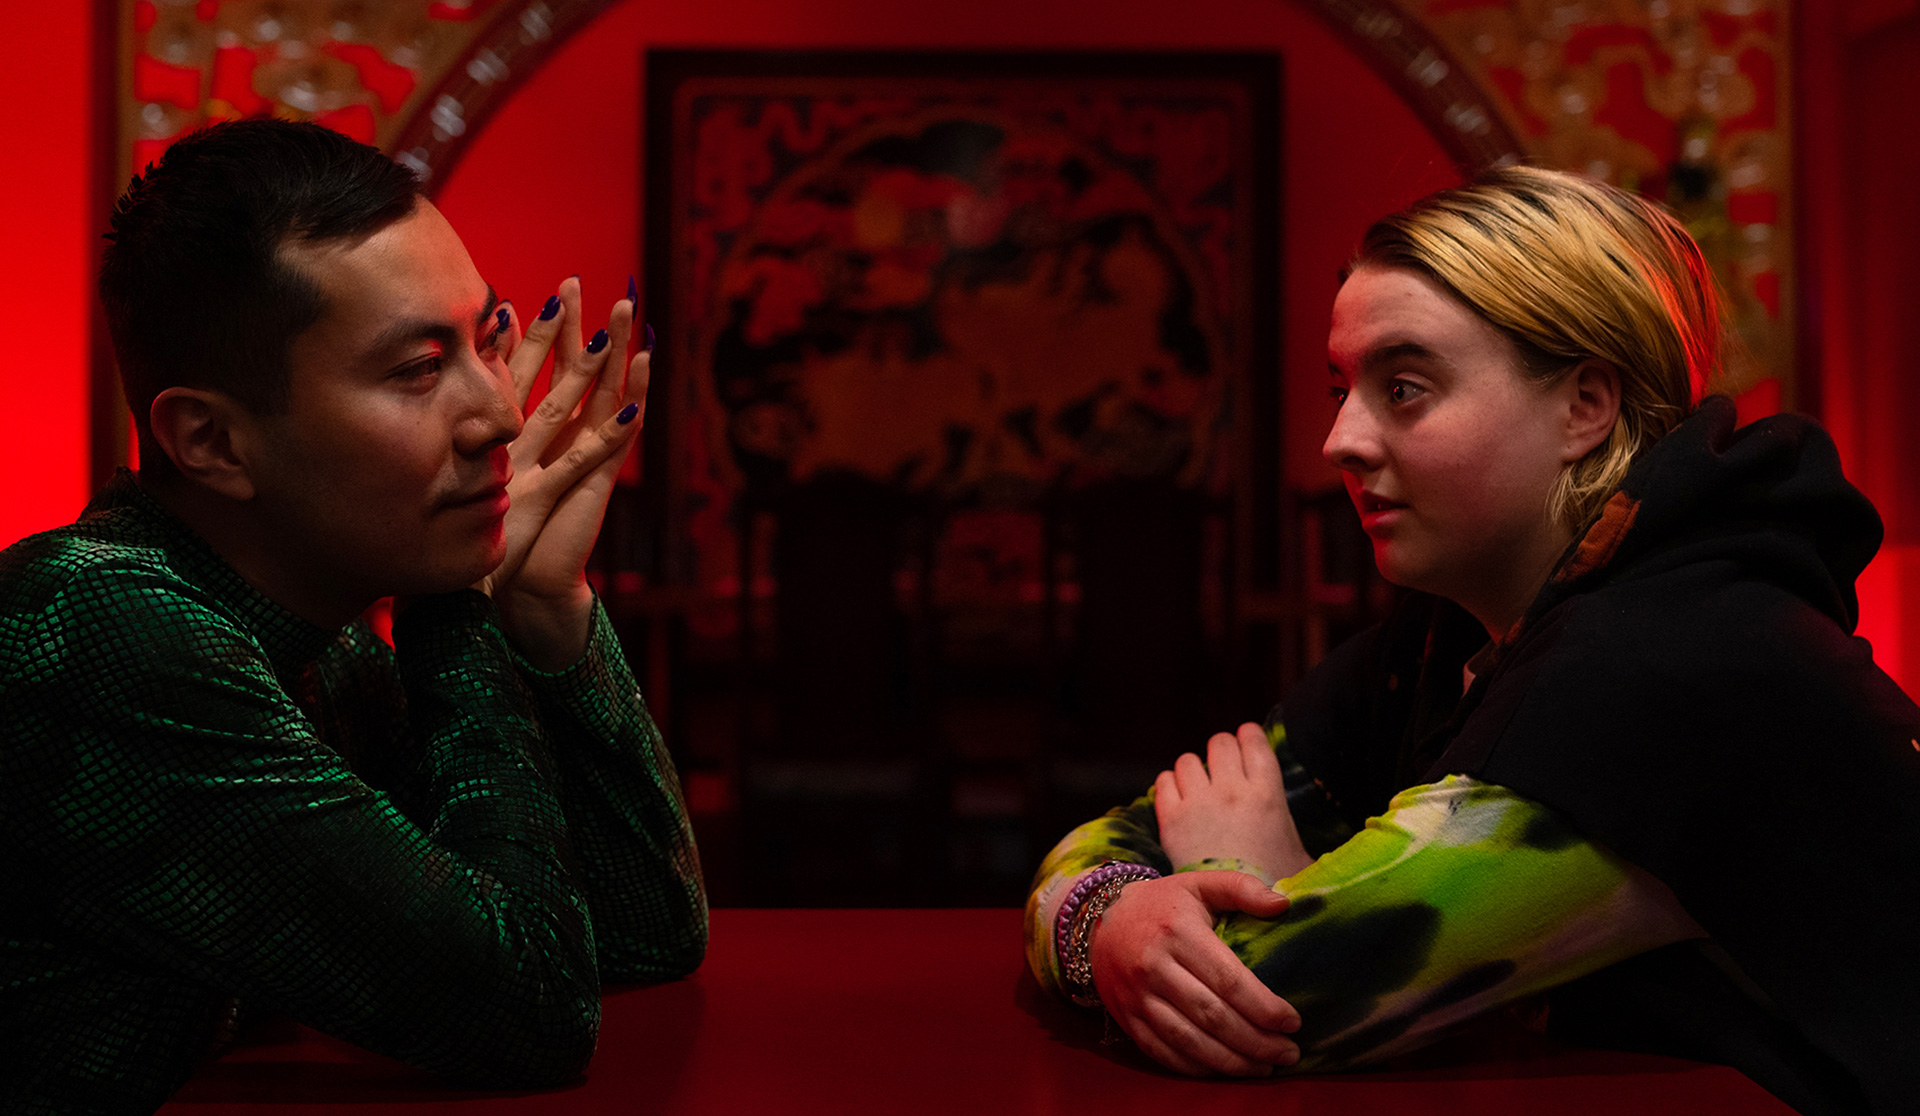 U.S. Trailer for Ashley McKenzie’s Acclaimed Queer Coming-of-Age Drama Queens of the Qing Dynasty